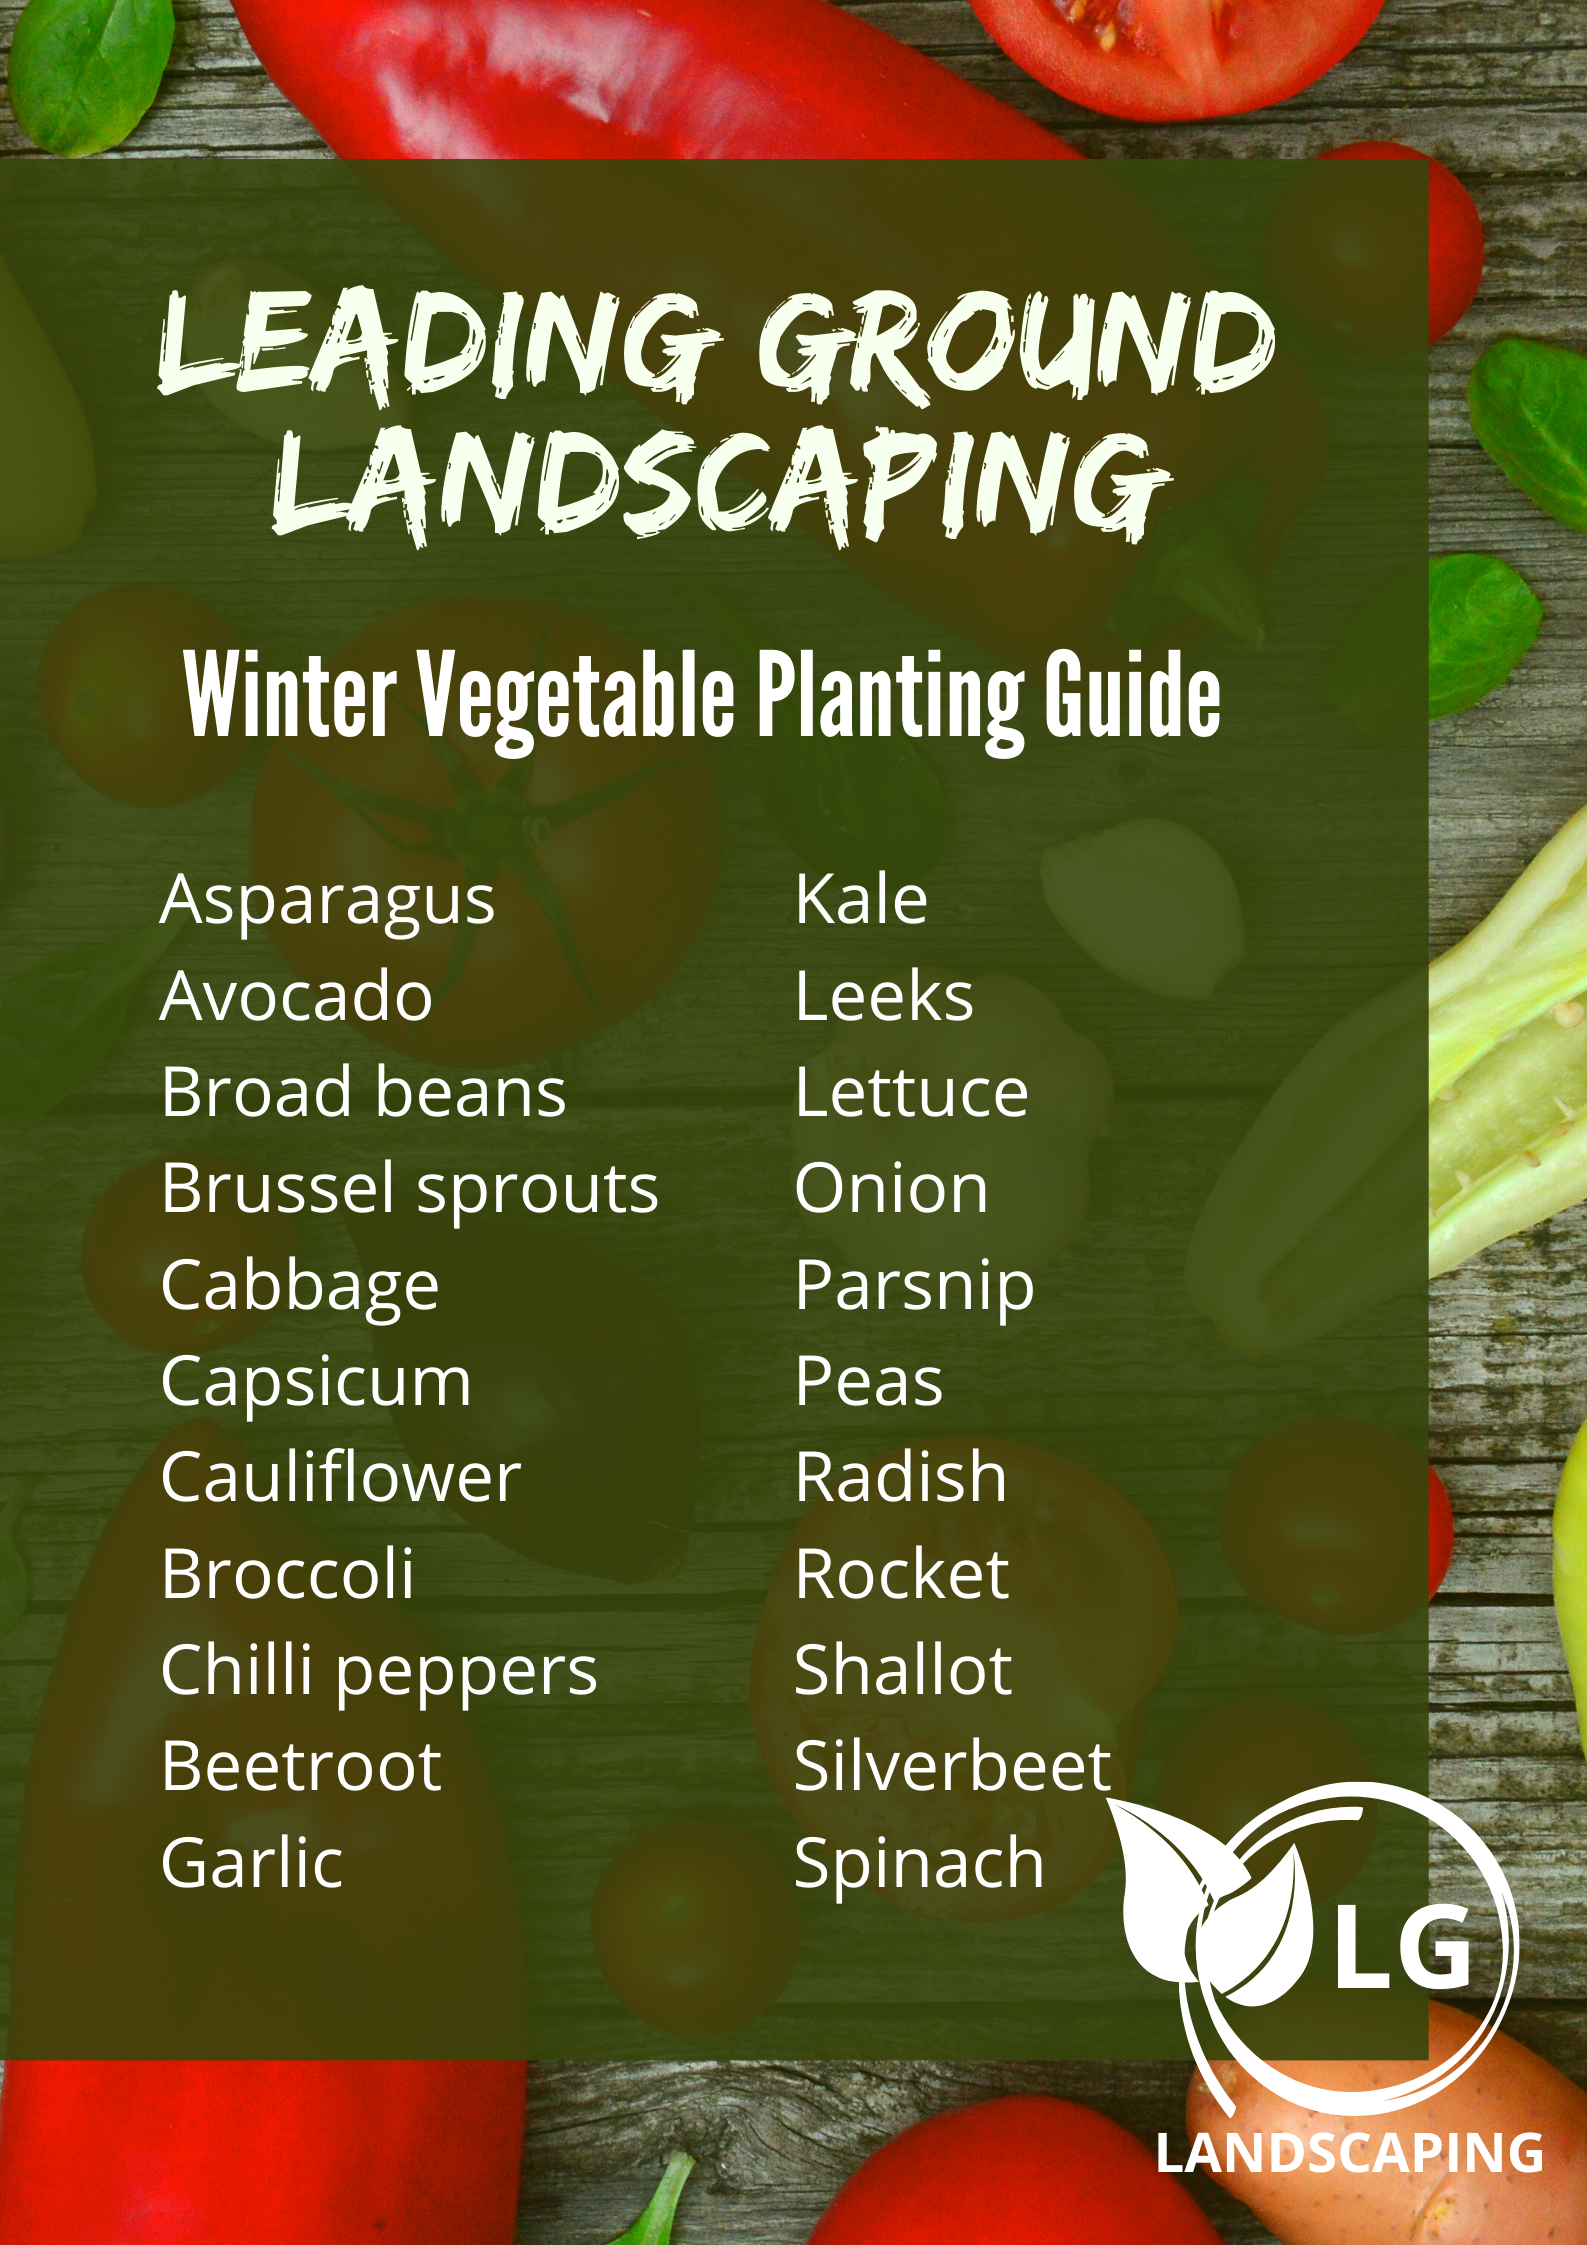 Winter Planting Guides